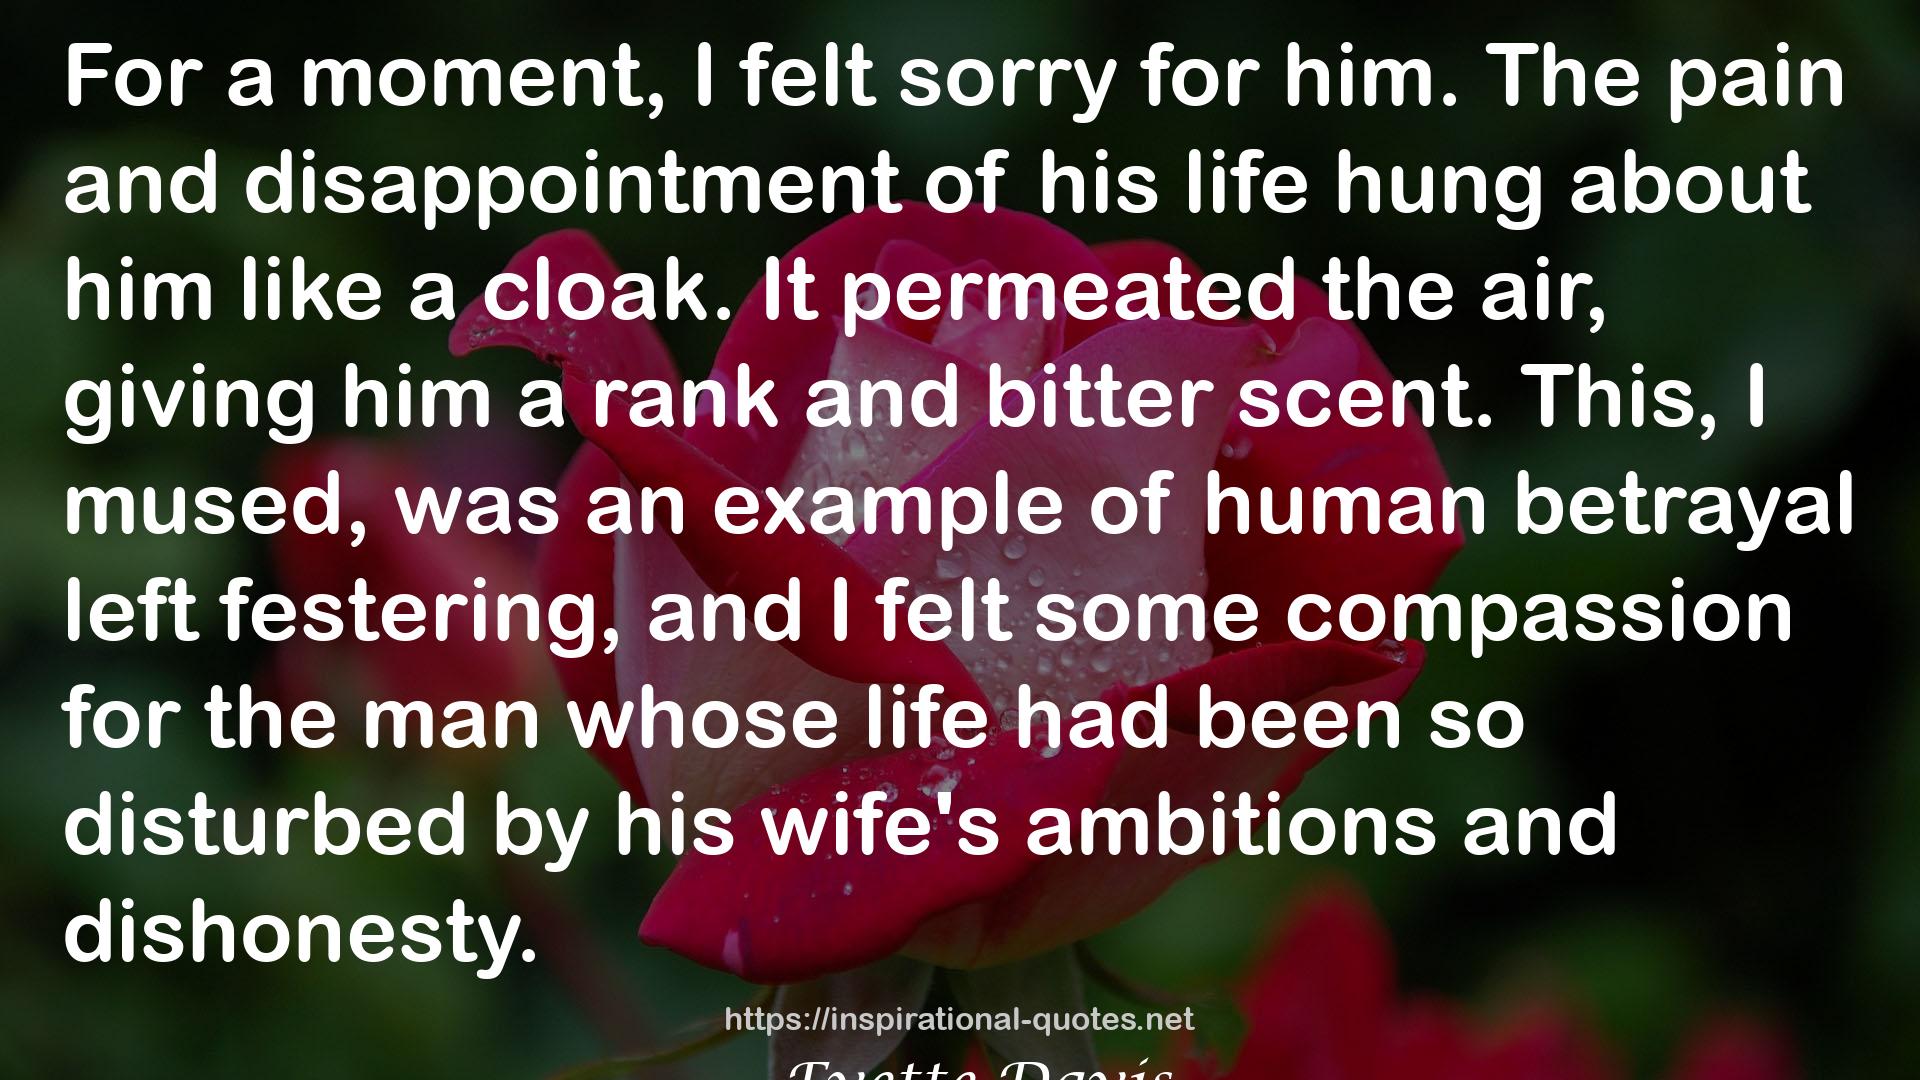 his wife's ambitions  QUOTES